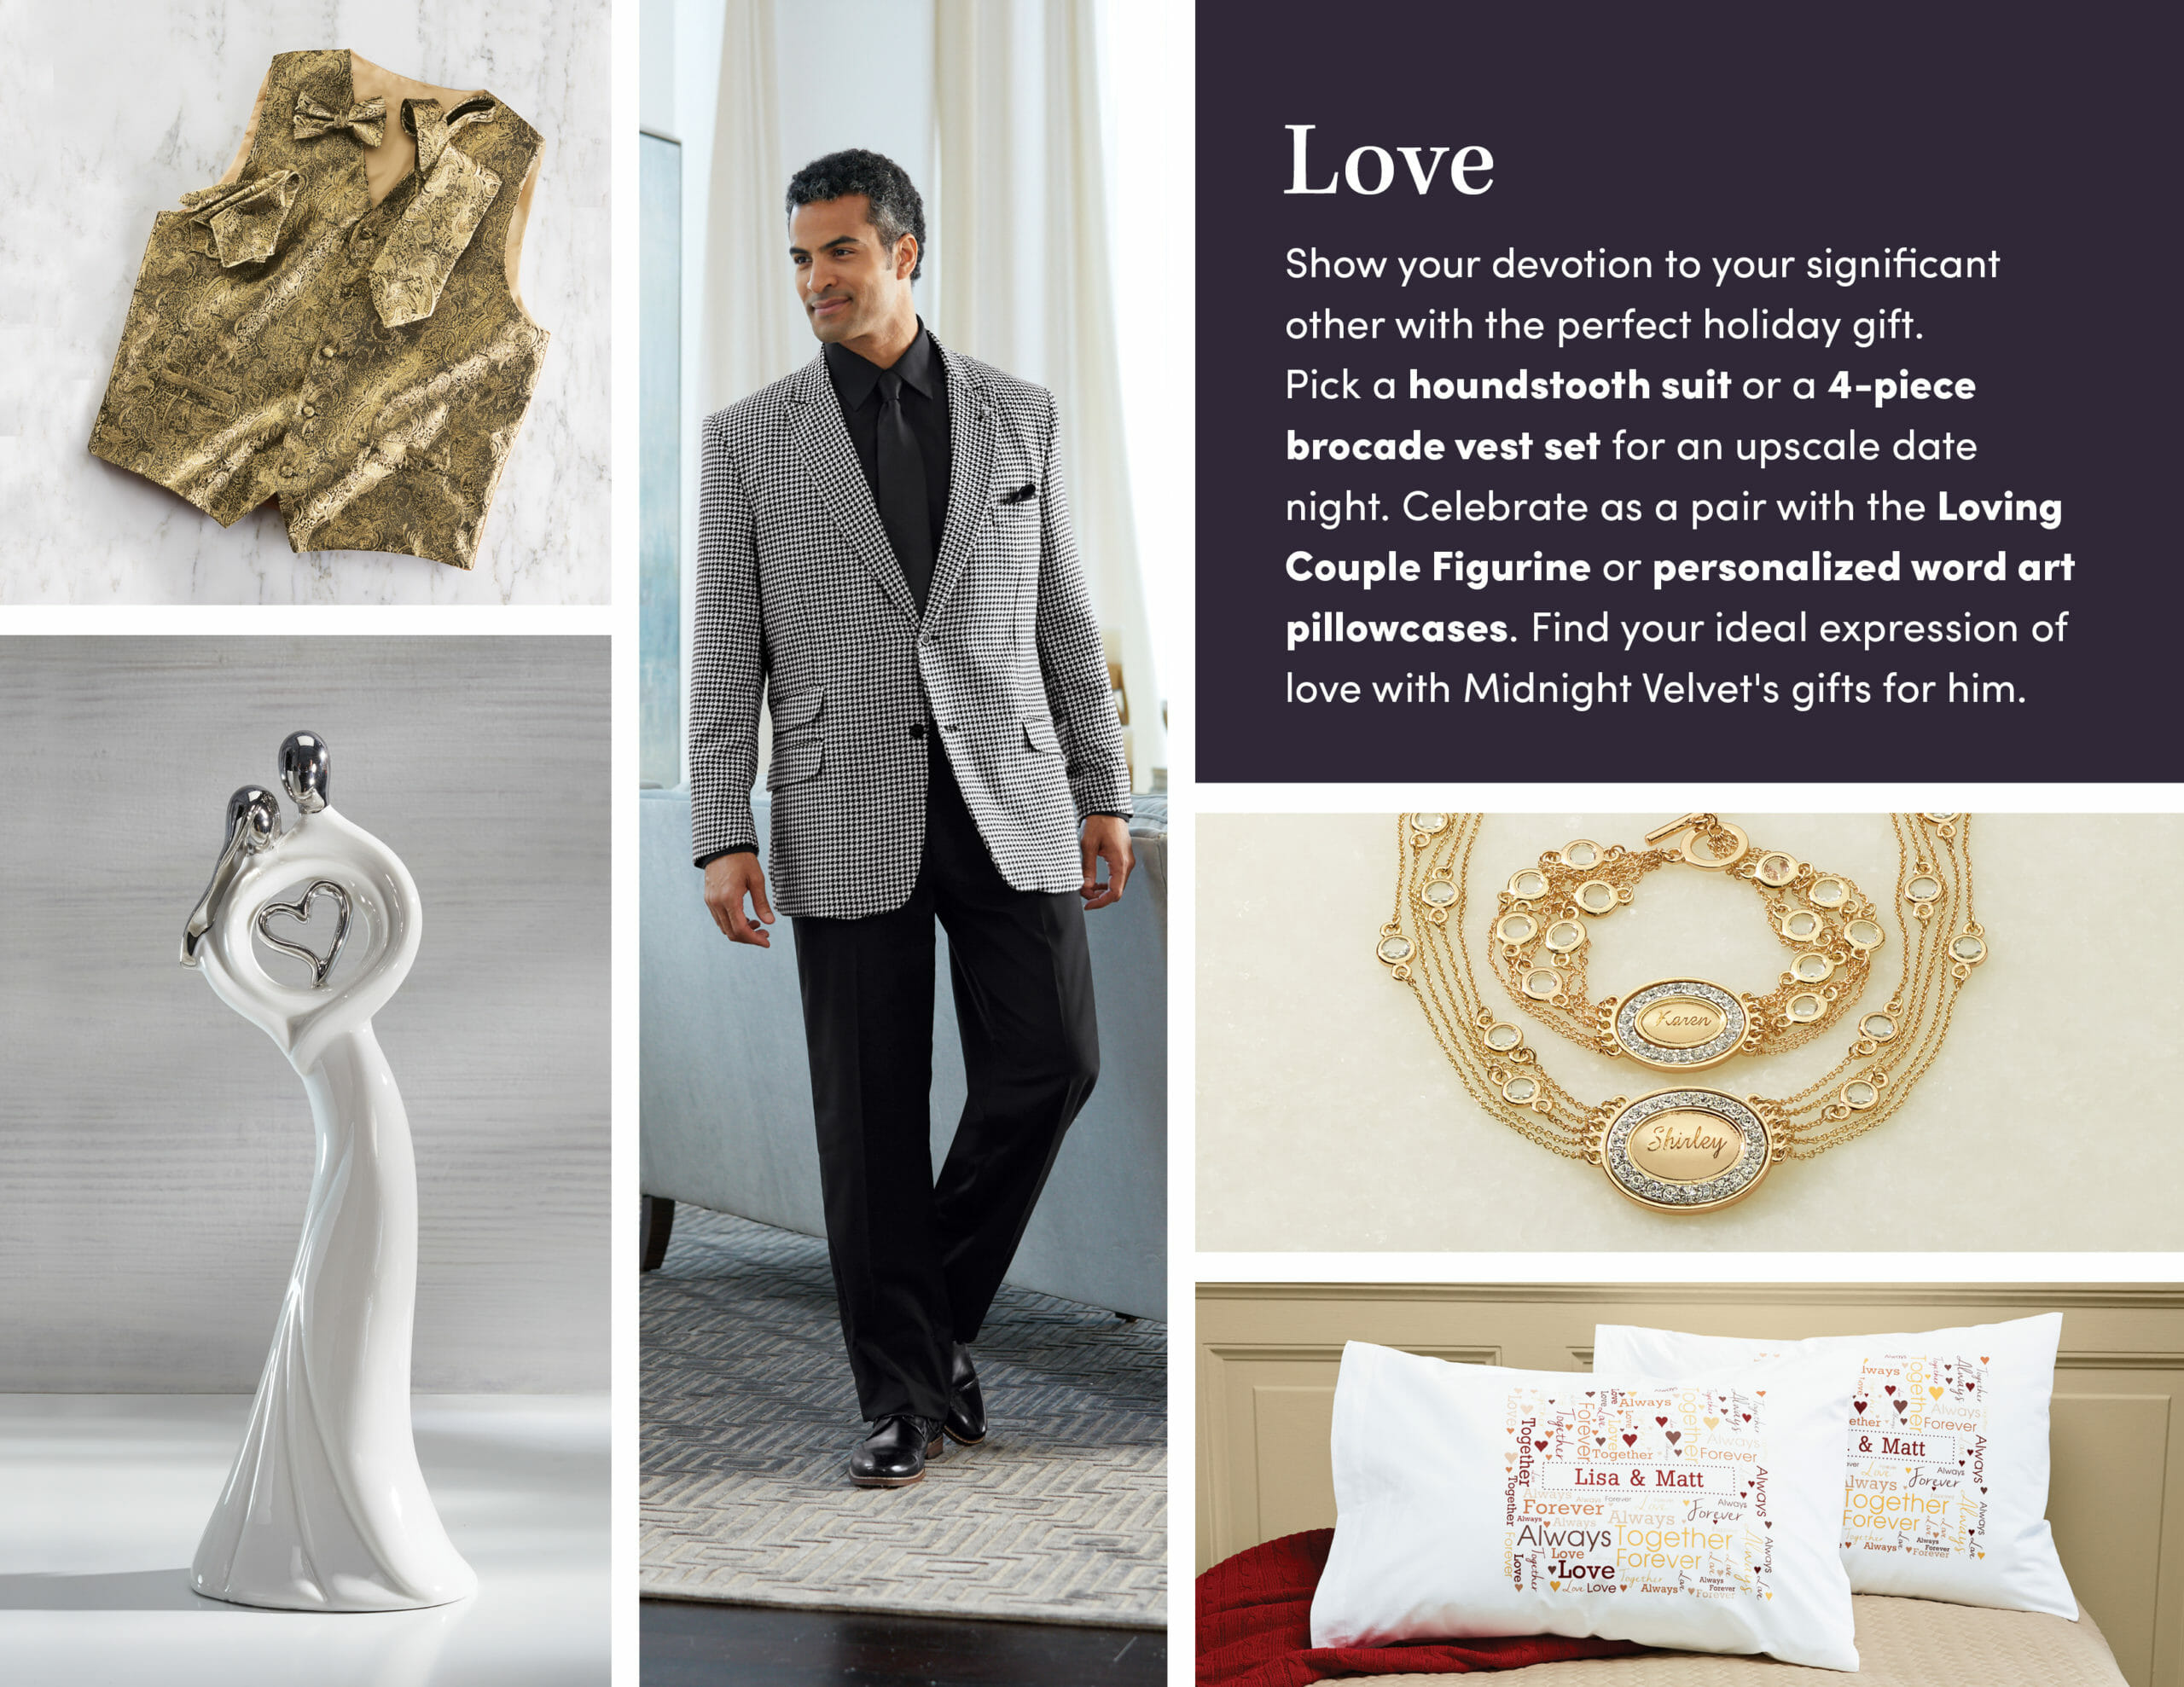 Love, A gold man's vest set, a couple figurine, a man in a grey and black suit, personalized jewelry and pillowcases.